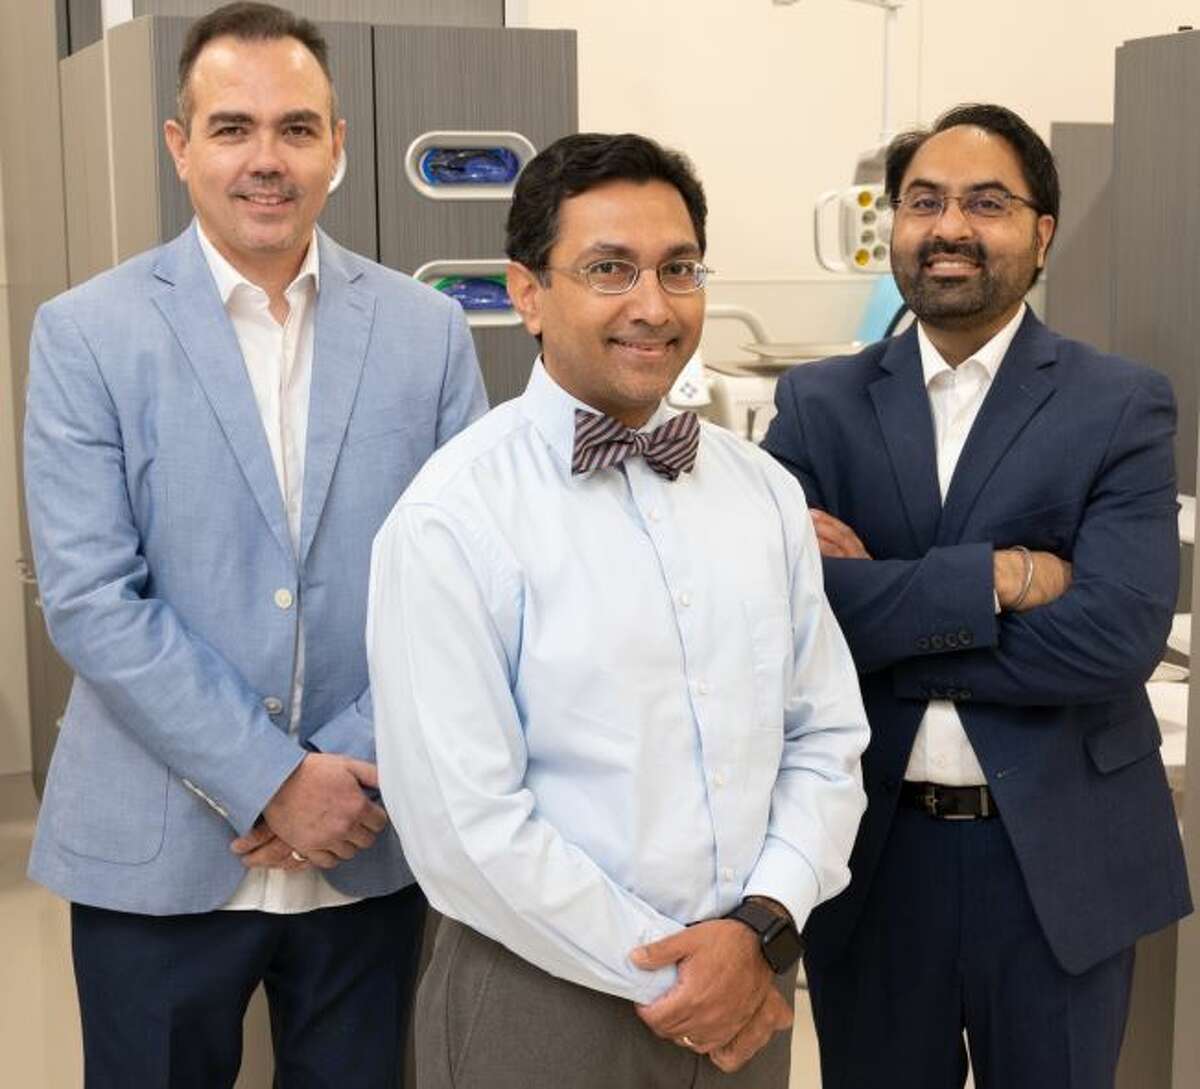 The Southern Illinois University School of Dental Medicine has expanded its graduate offerings with a specialty training program in orthodontics. Pictured are, from left, ) SIU SDM orthodontics resident Feras Al Khatib, DMD; Achint Utreja, DDS, MS, PhD, director of the orthodontics graduate program; and Amritpal Kullar, DMD, orthodontics resident.